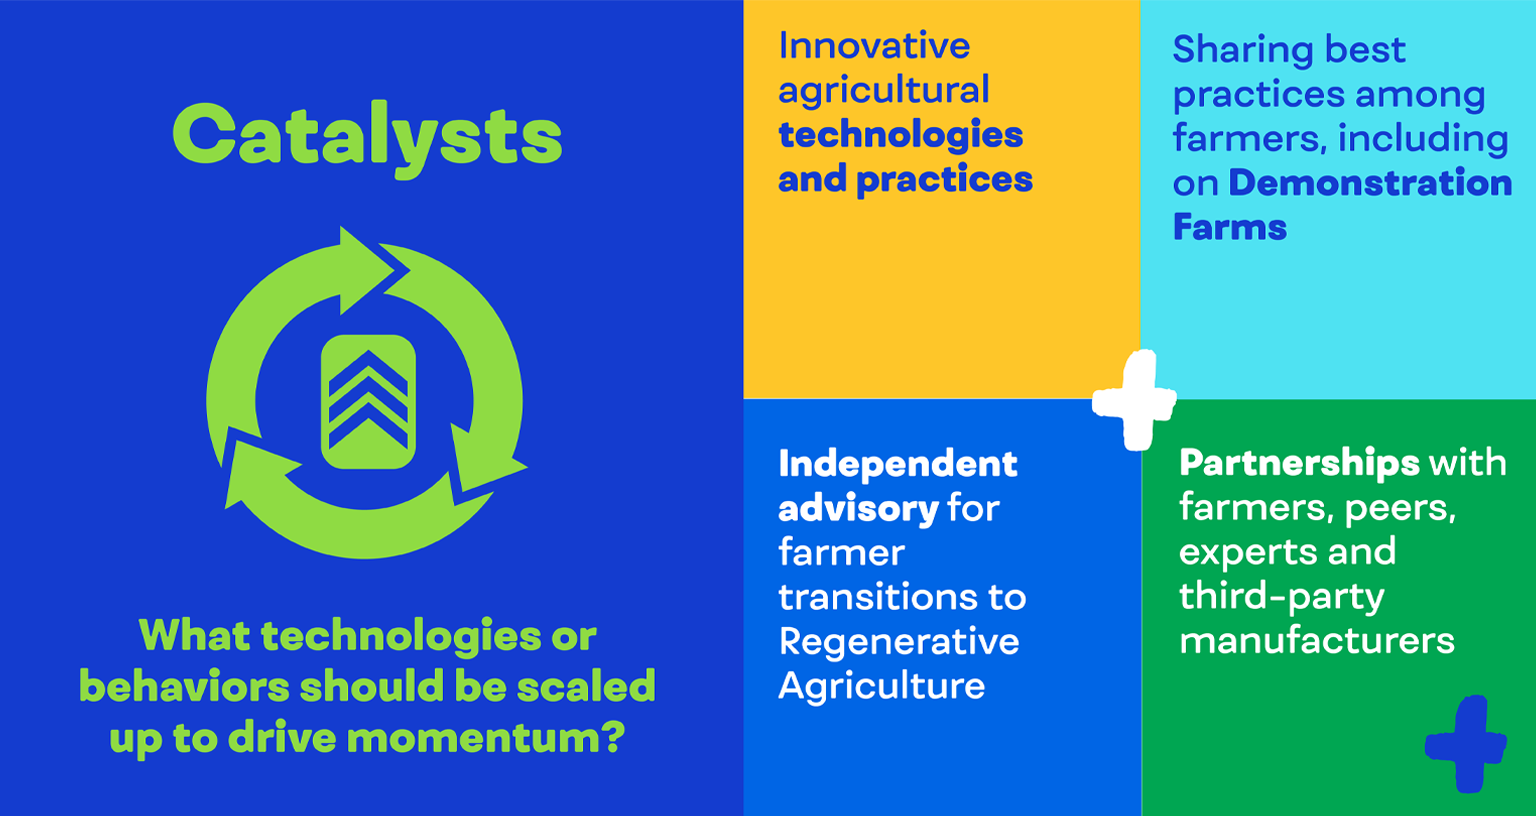 Catalysts: What technologies or behaviors should be scaled up to drive momentum?